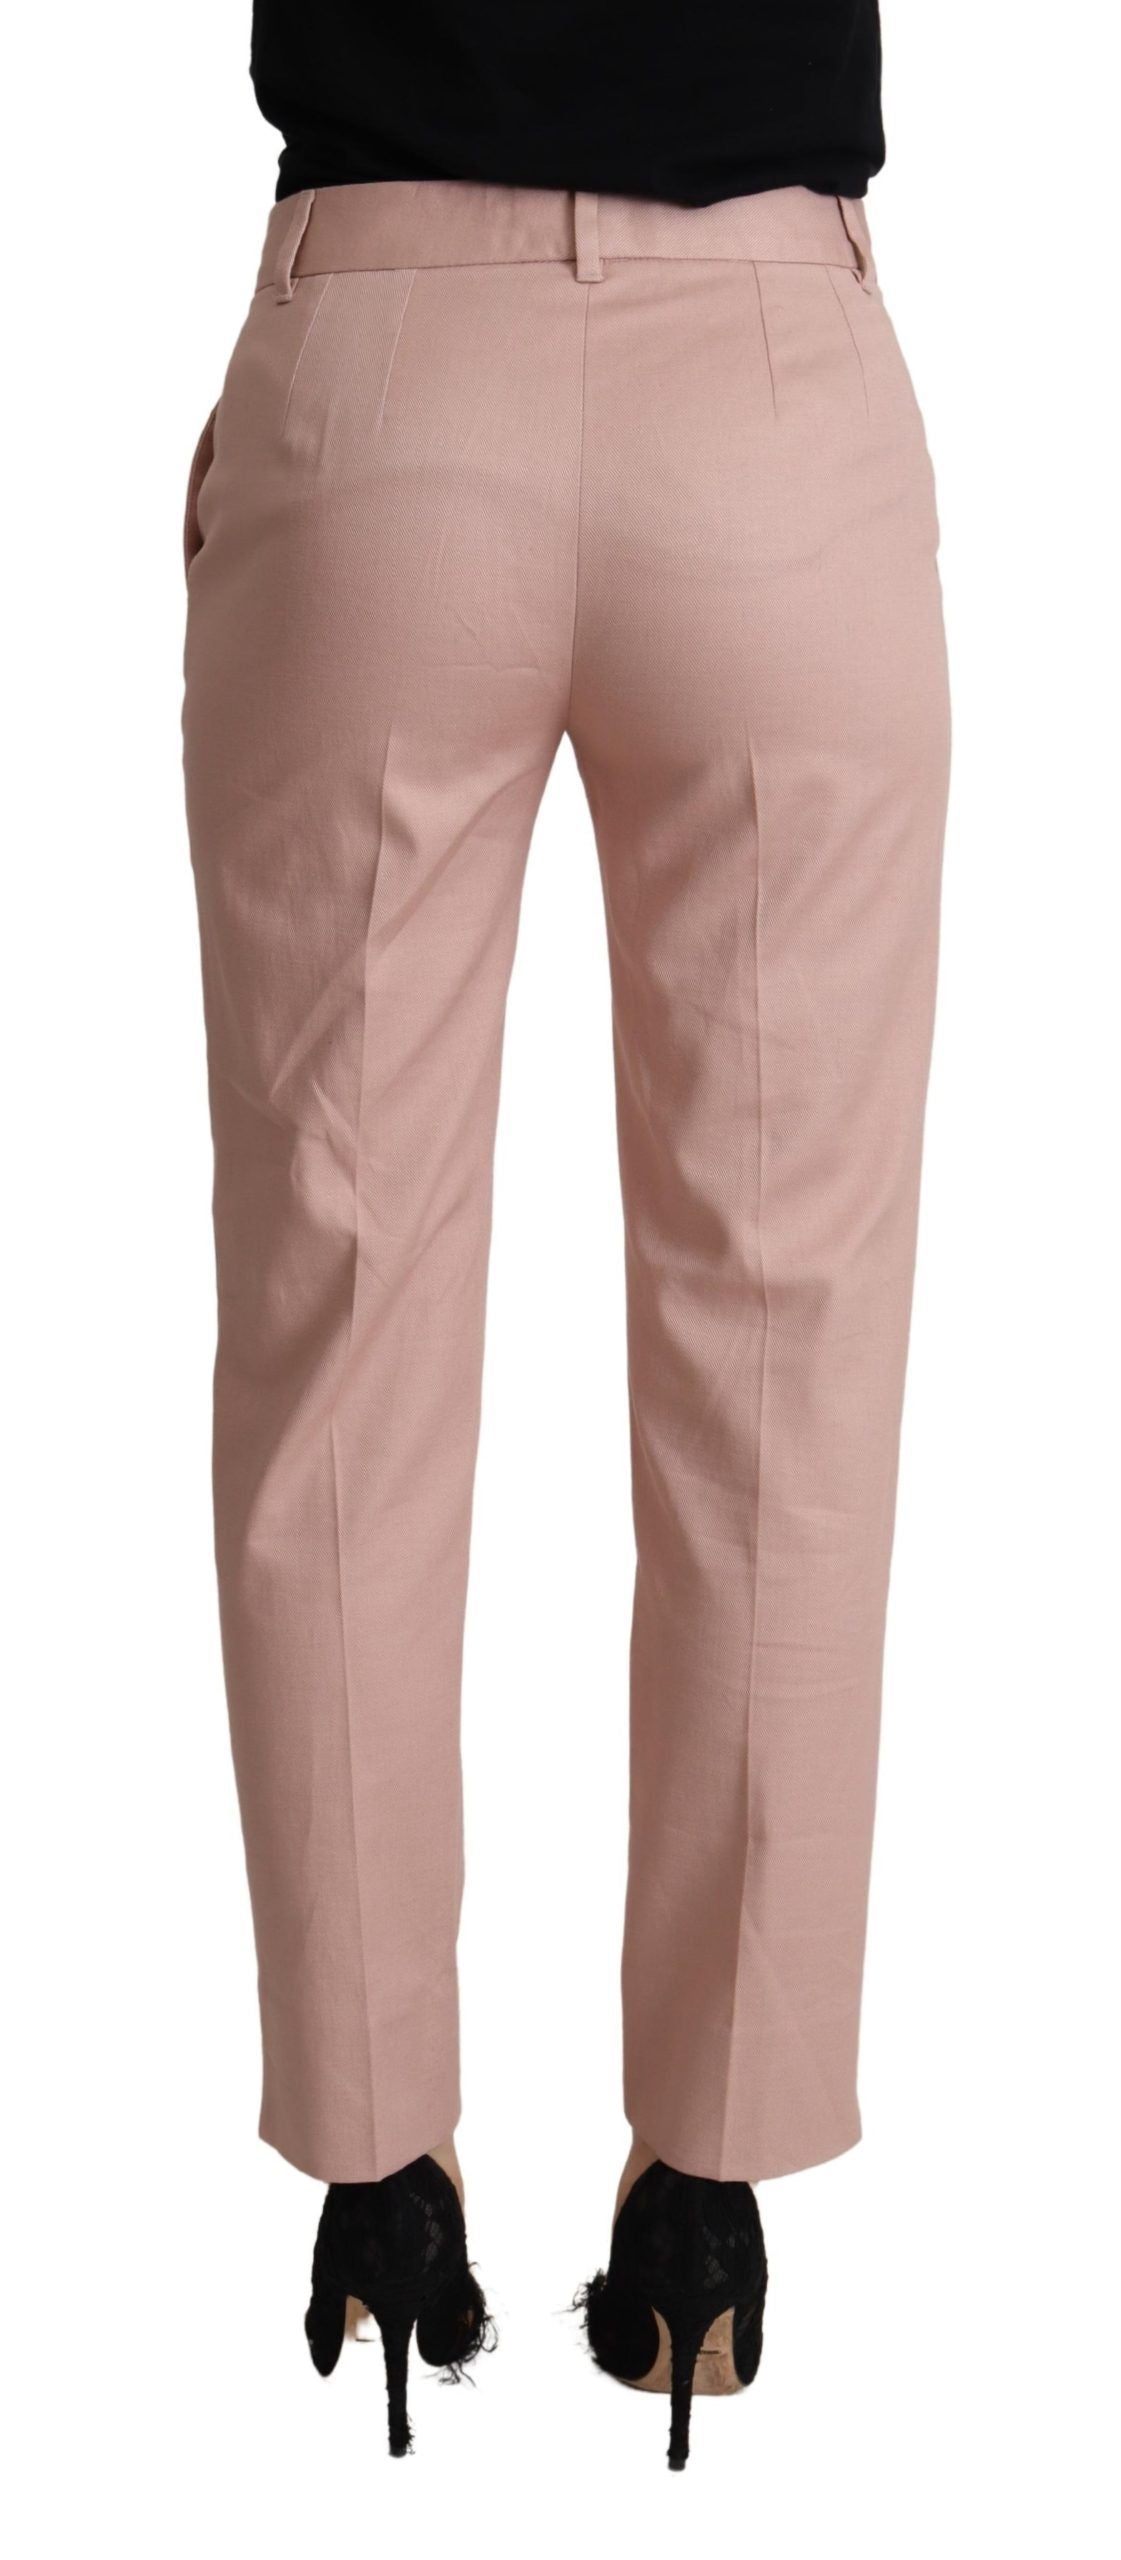 Elegant Pink Tapered Pants for Sophisticated Style